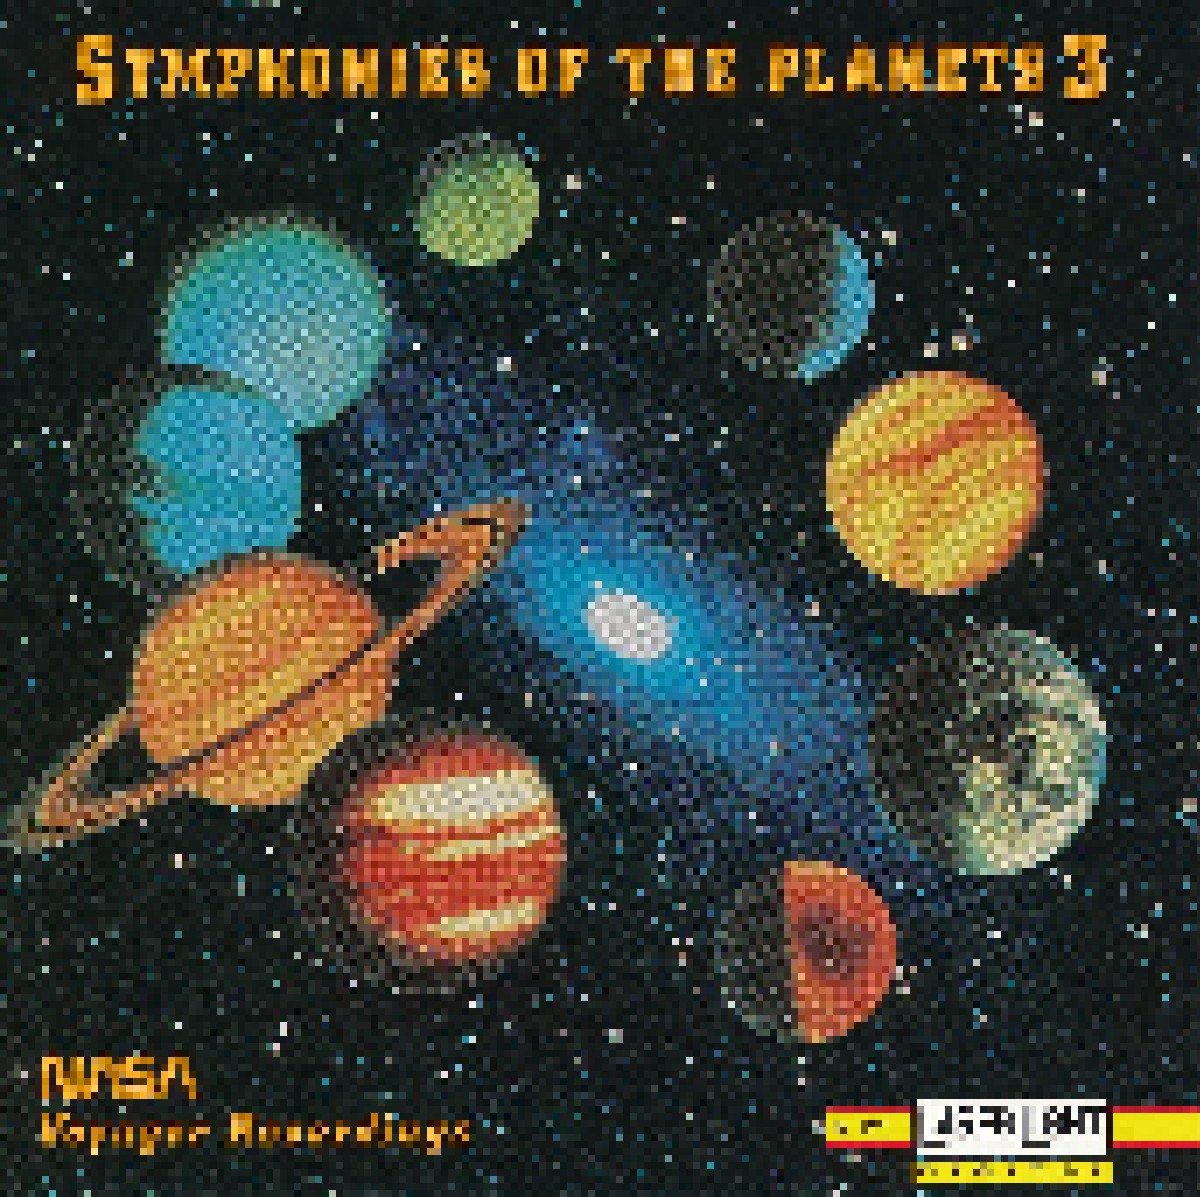 voyager recordings symphonies of the planets